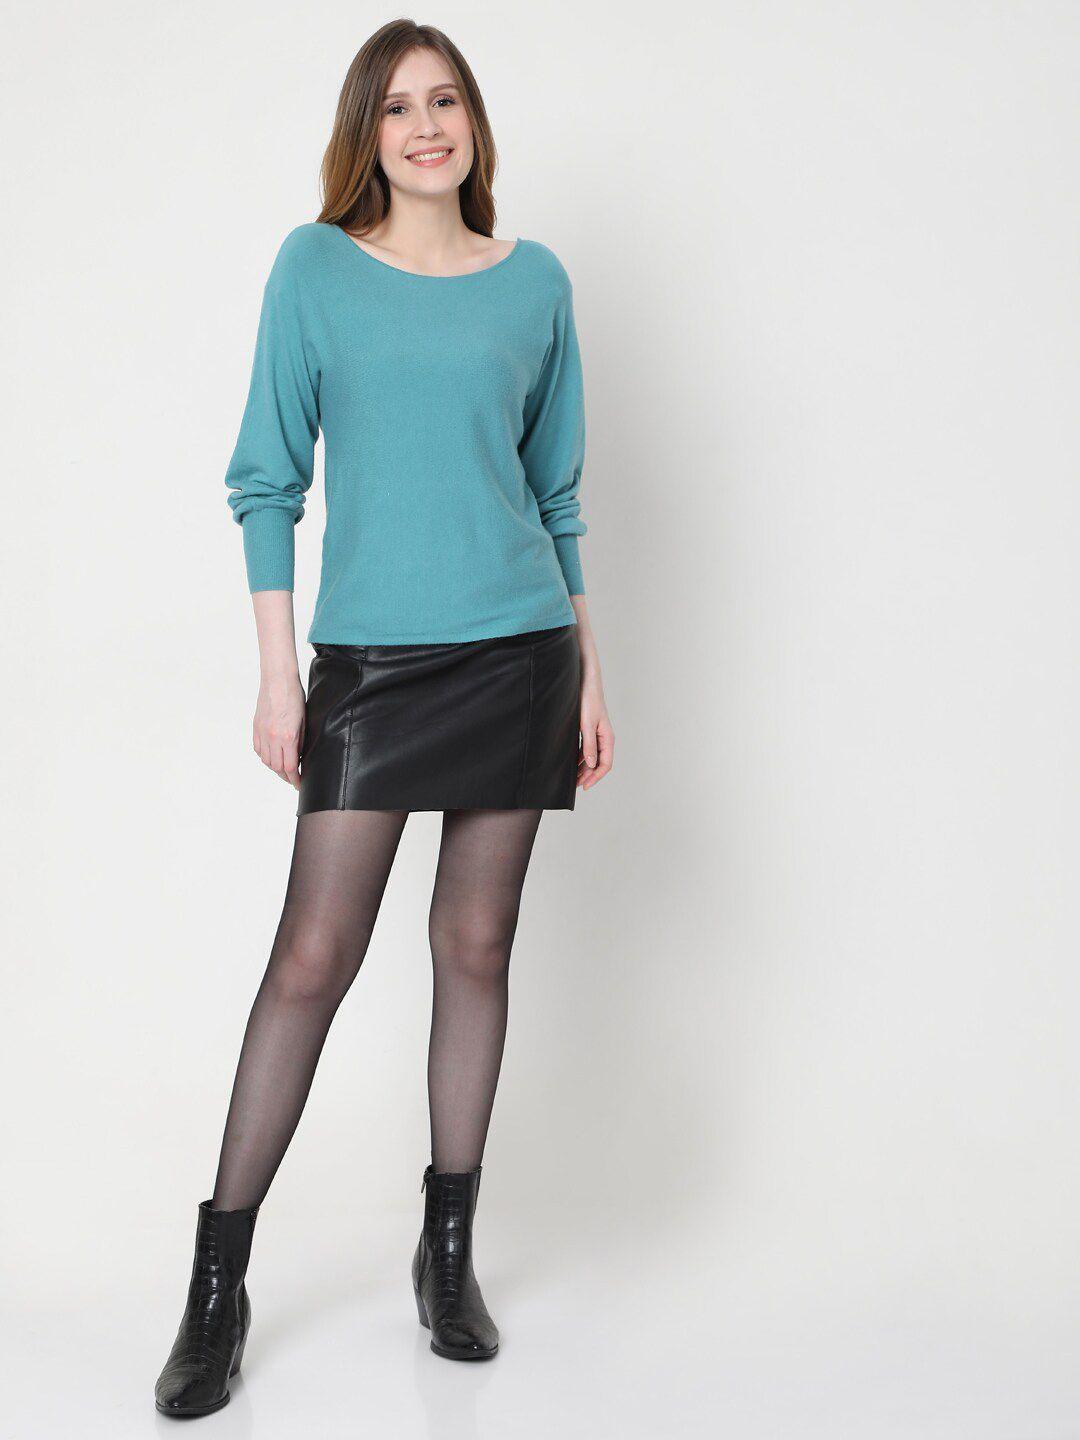 Vero Moda Women Turquoise Blue Solid Cuffed Sleeves Pullover